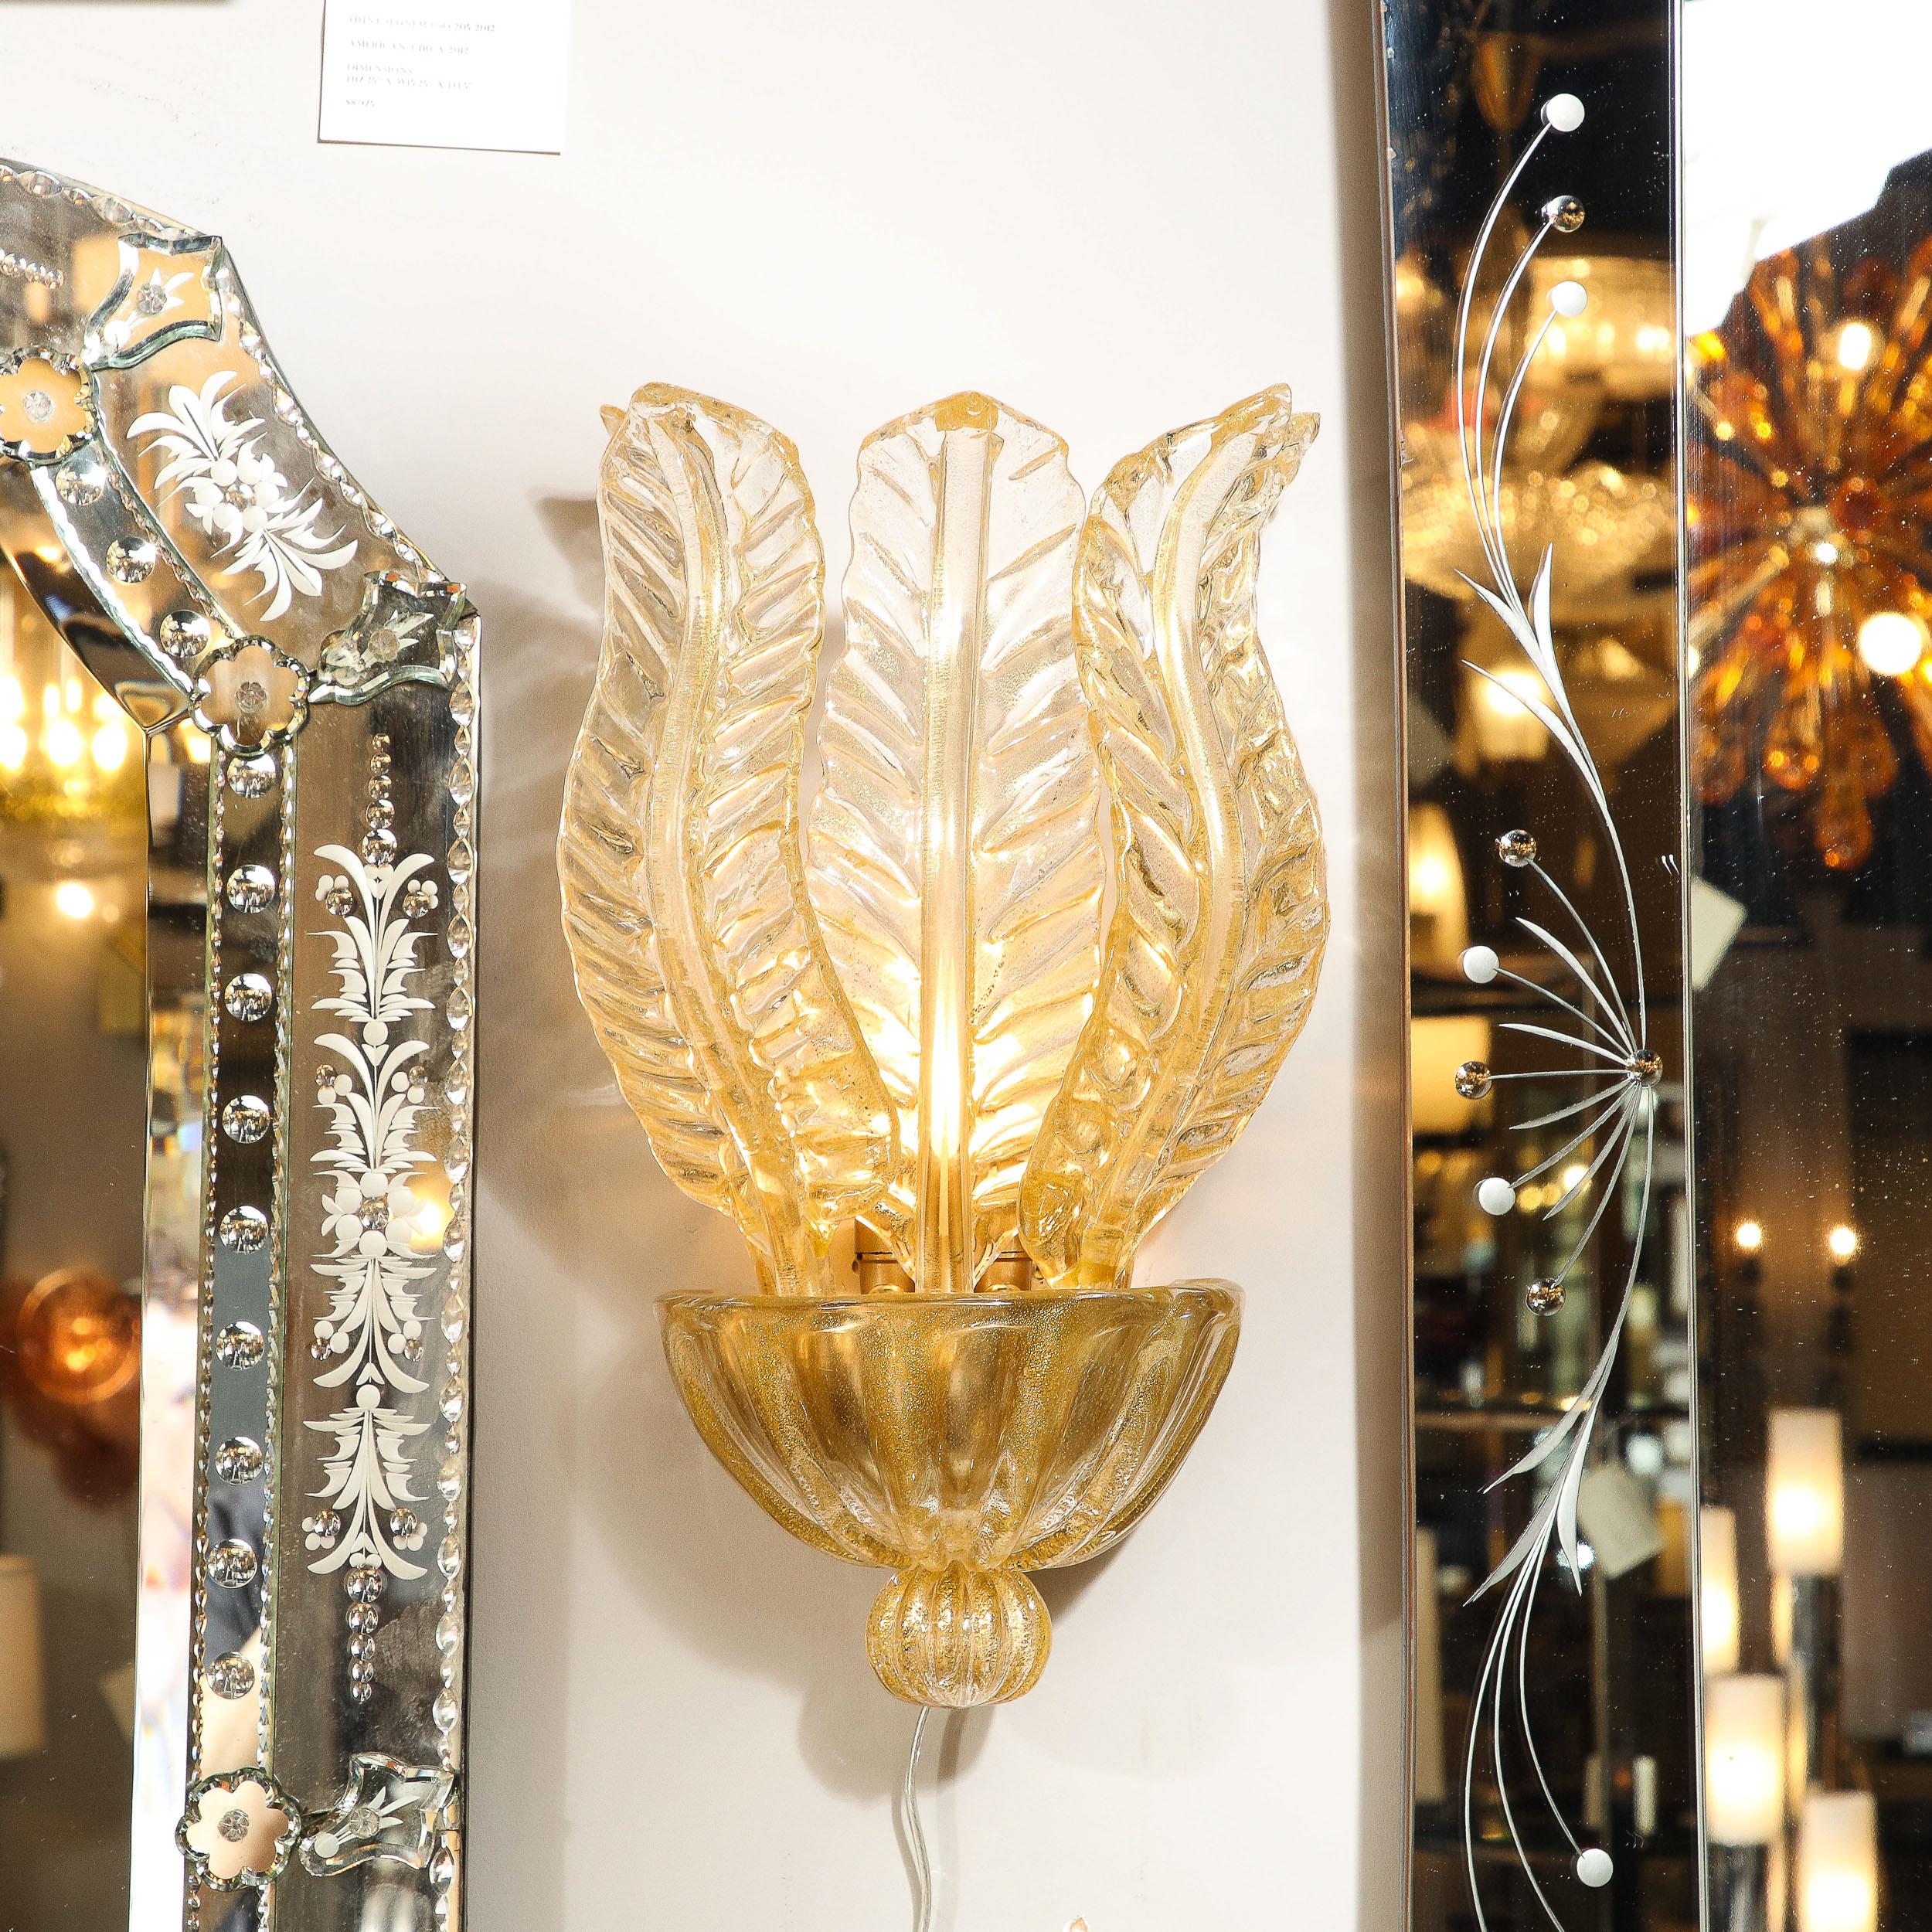 This stunning pair of modernist sconces were handblown in Murano, Italy- the island off the coast of Venice renowned for centuries for its superlative glass production. They feature domed and channeled bodies with volumetric oval embellishments at